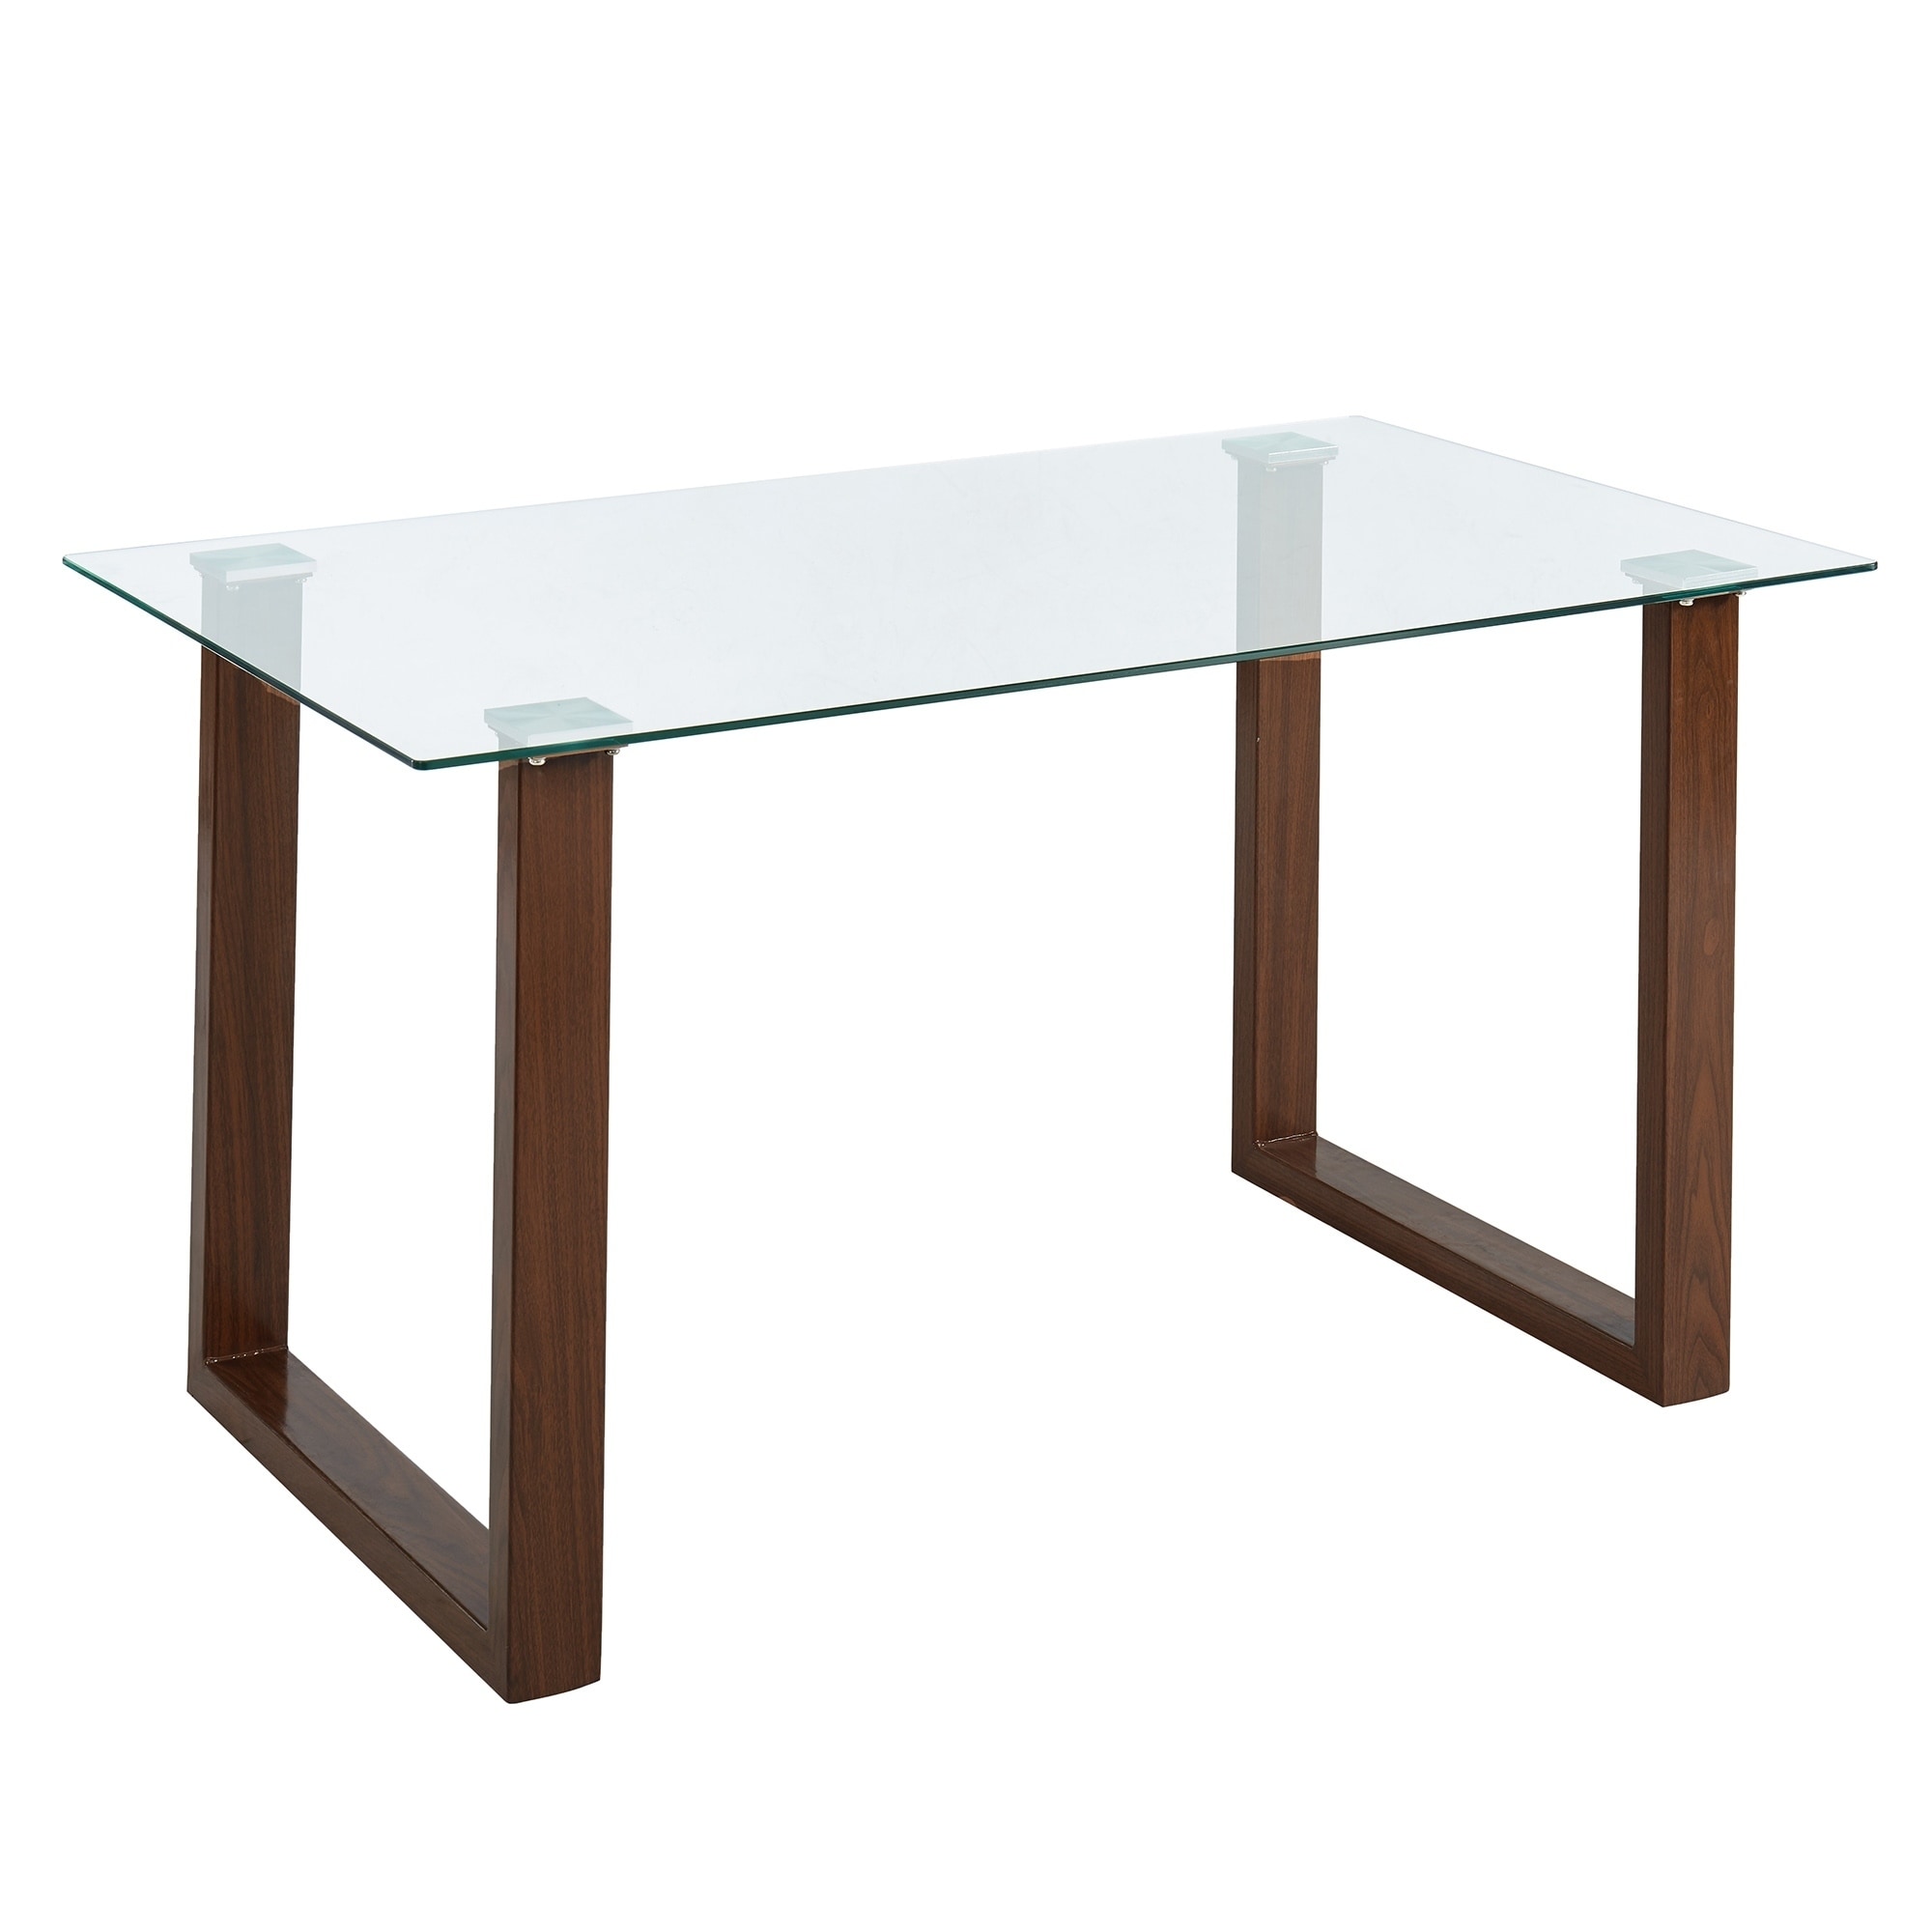 Contemporary Glass Metal Dining Table Overstock 29976187